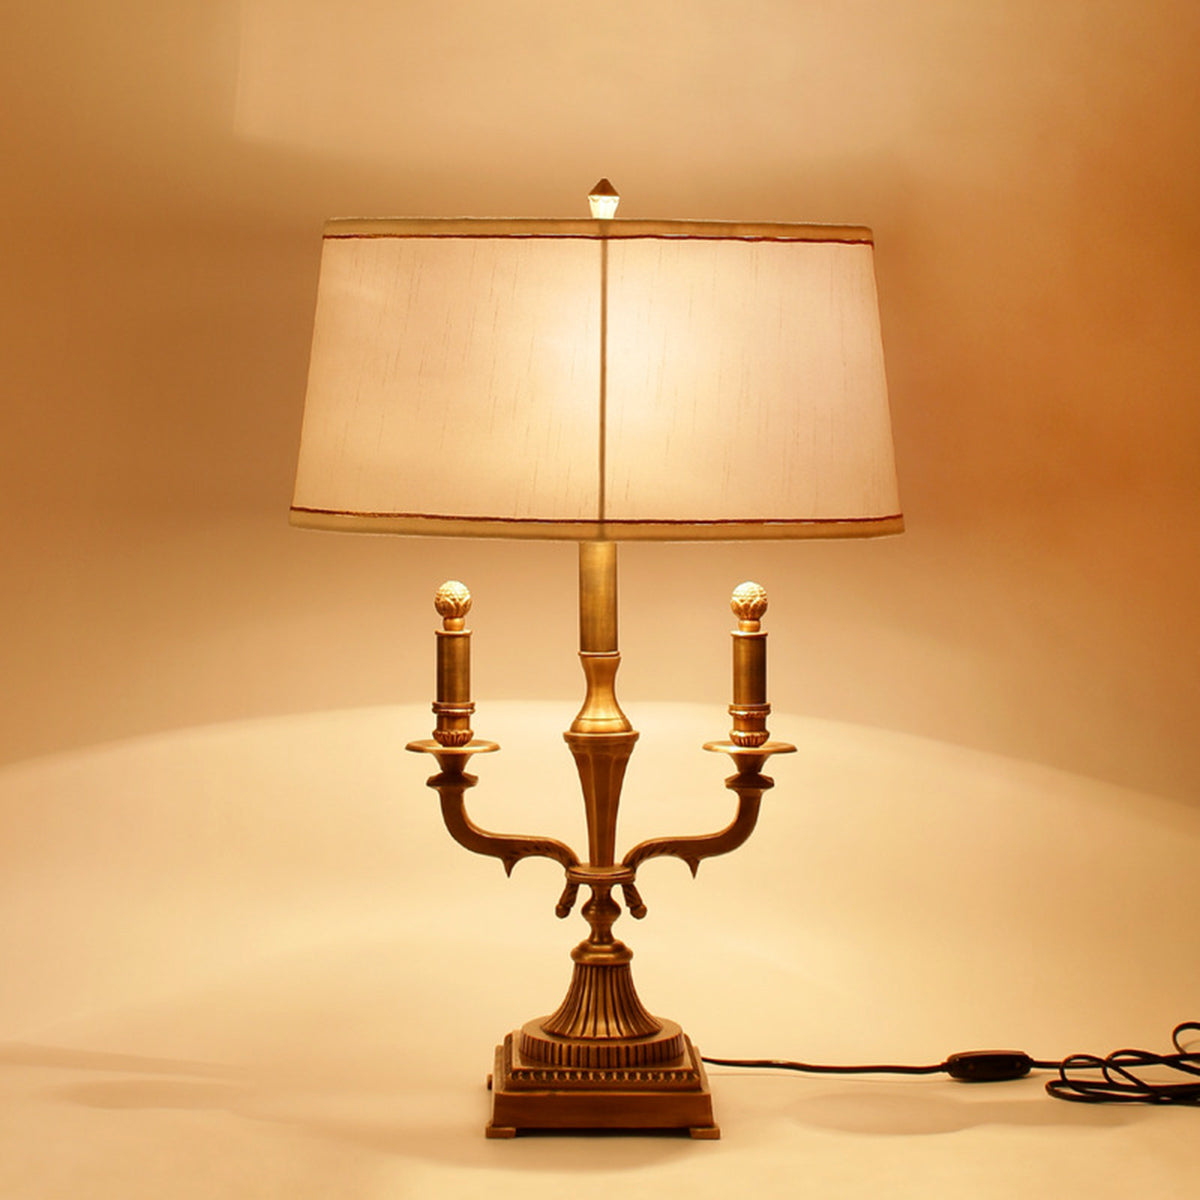 Detec White Fabric Shade Table Lamp with Gold Base